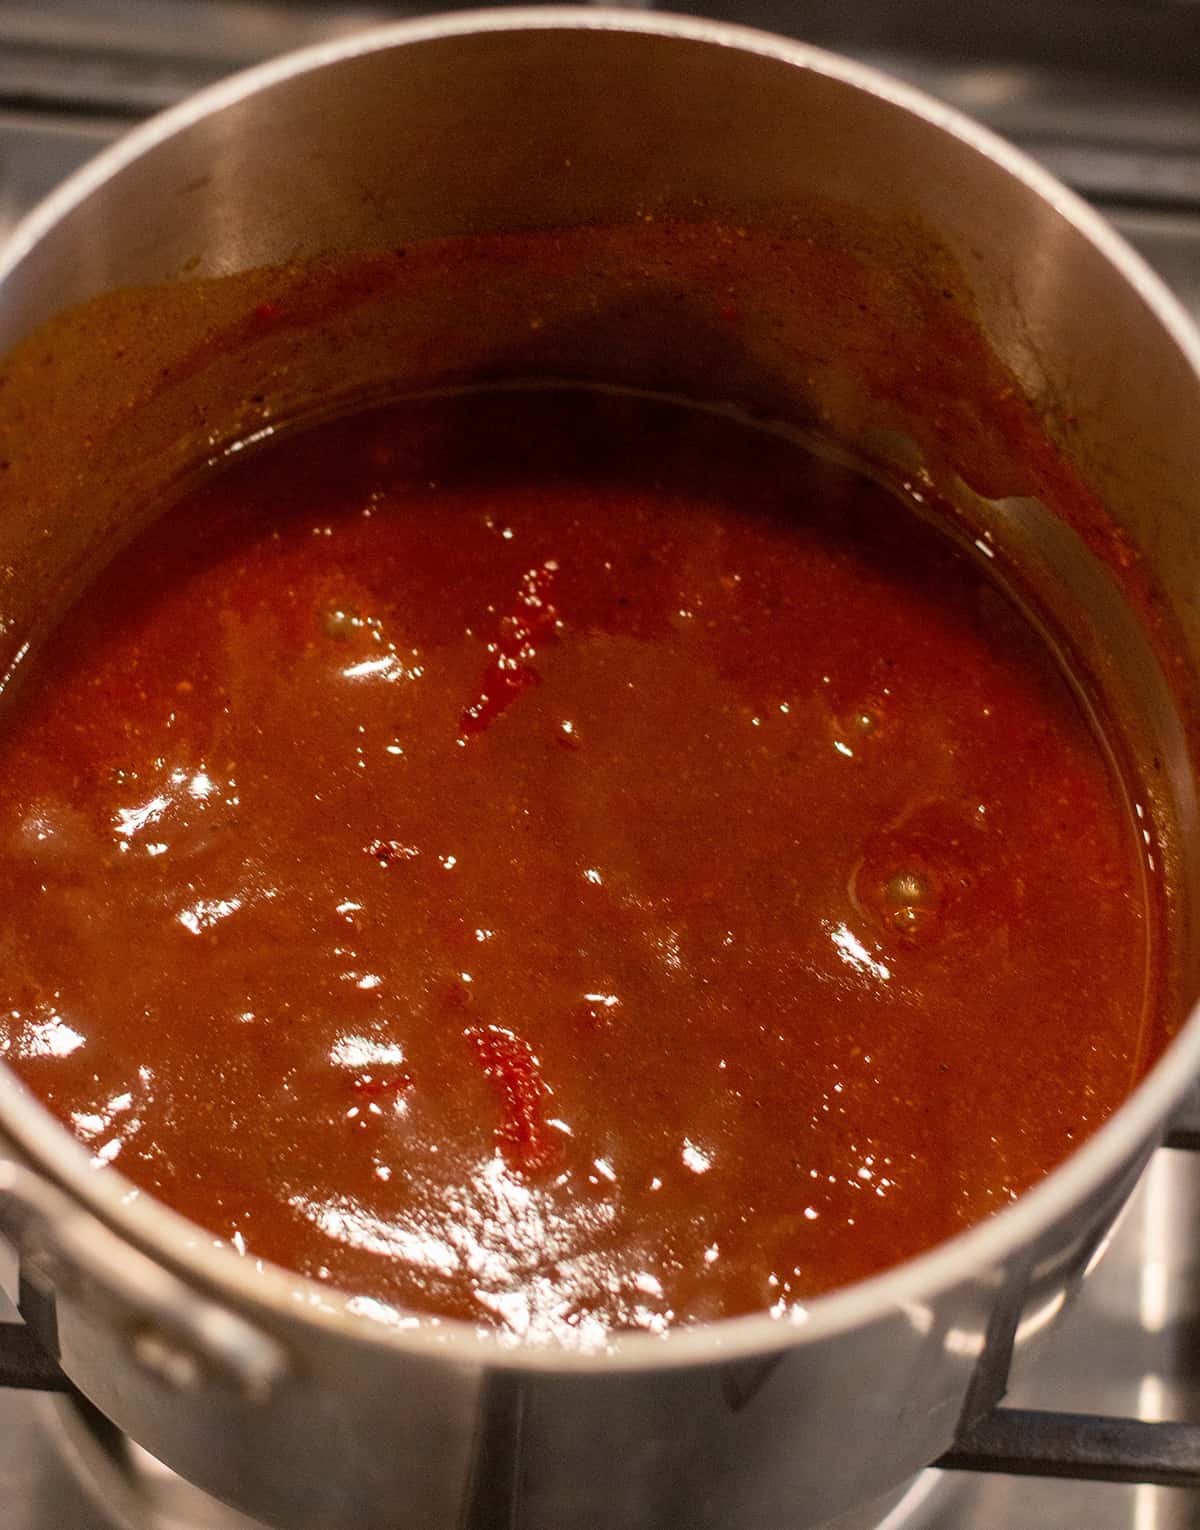 Homemade enchilada sauce simmering on a stove top.